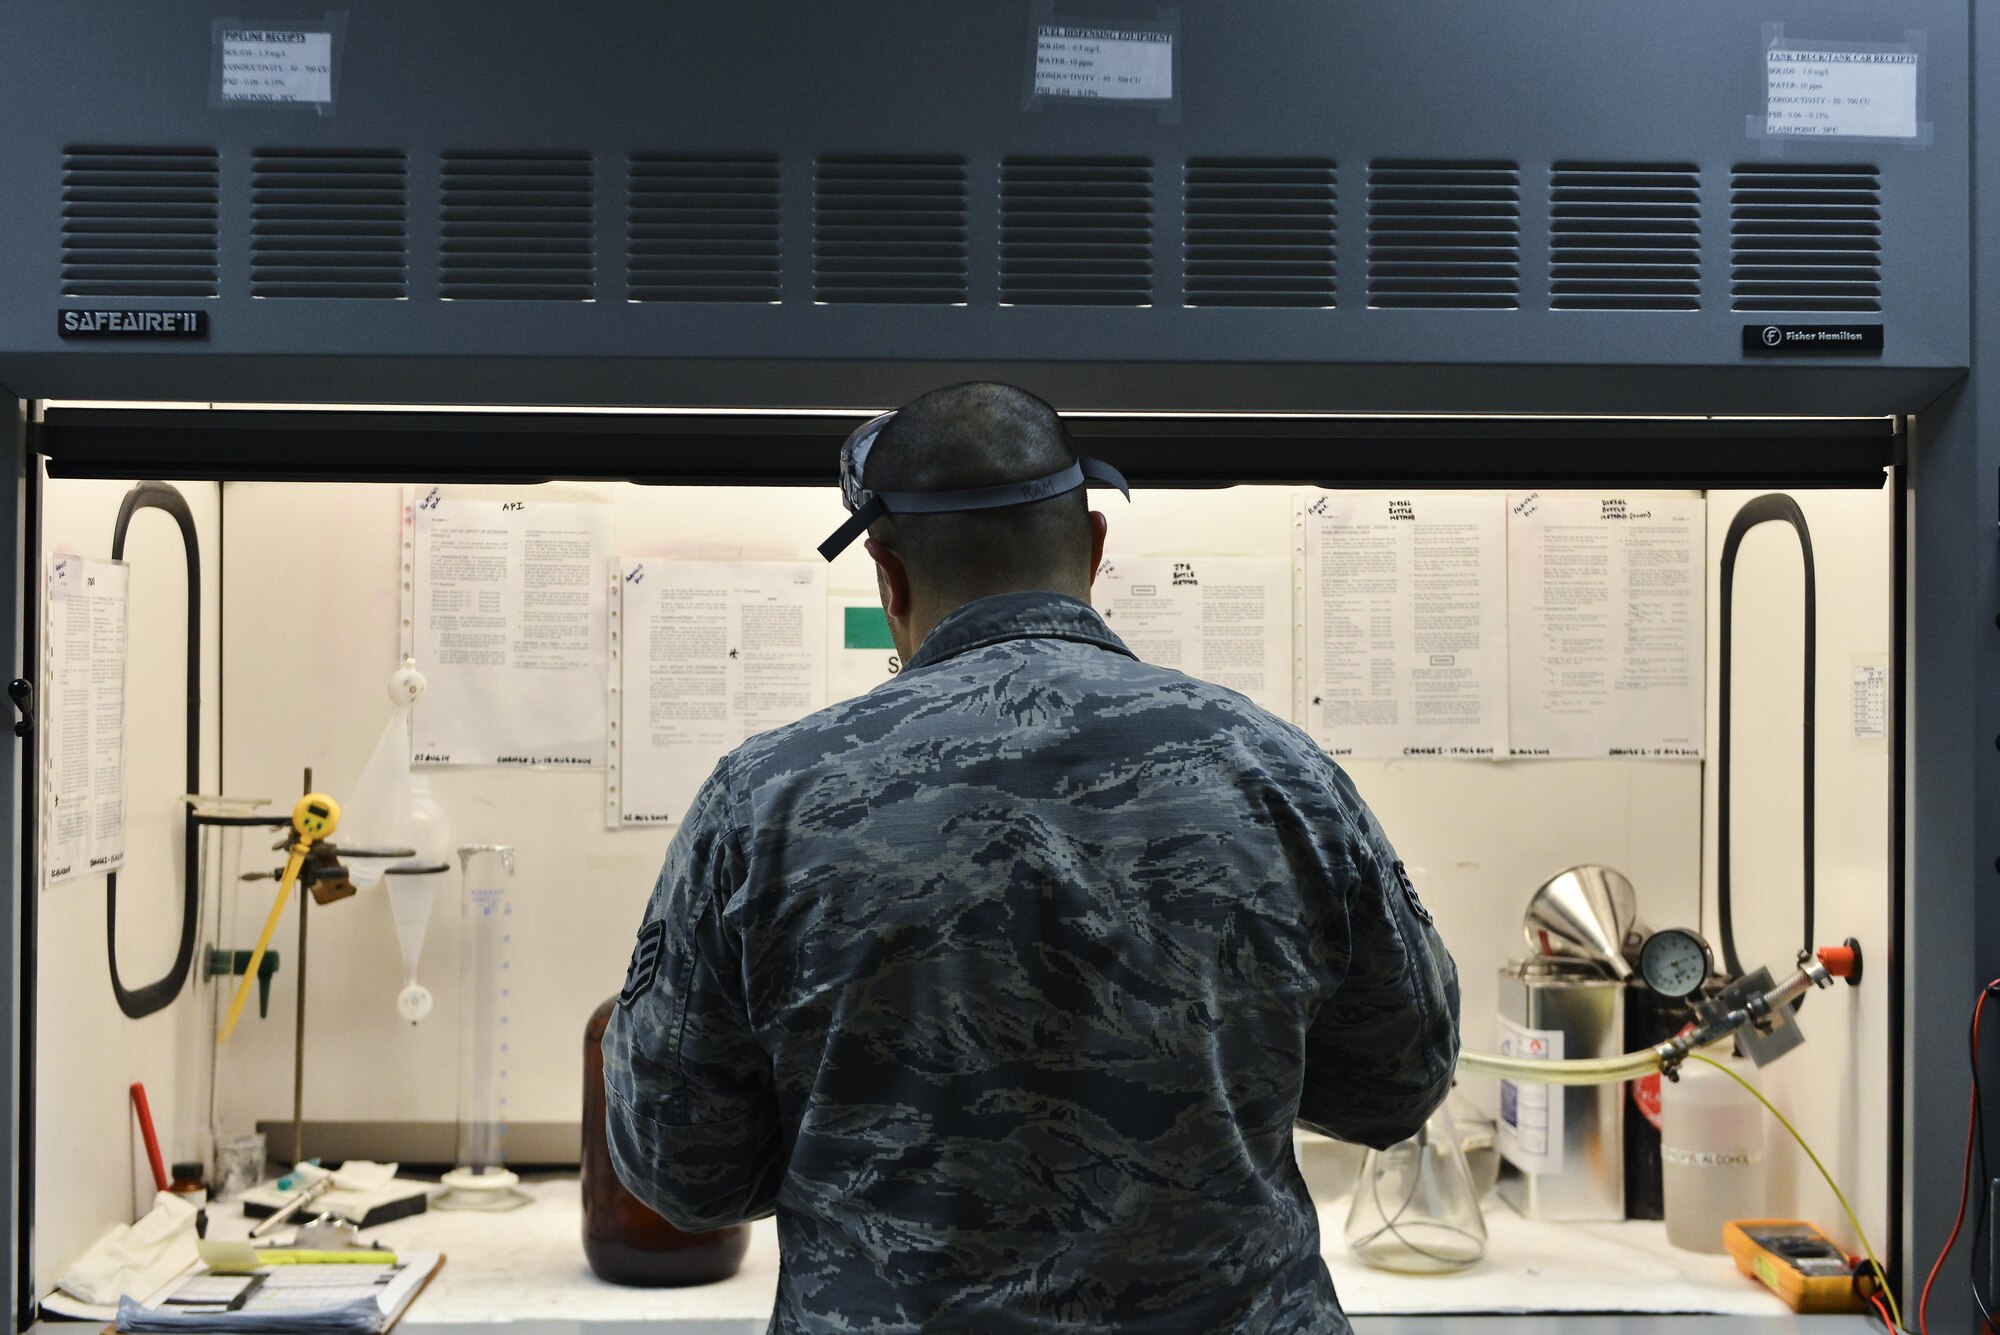 Staff Sgt. David Ramirez, 379th Expeditionary Logistic Readiness fuels laboratory, prepares to test jet petroleum 8 inside a laboratory August 18, 2015 at Al Udeid Air Base, Qatar. The base fuels laboratory at Al Udeid tests all petroleum that is used in aircraft, vehicles and generators throughout the installation to safeguard its quality, performance and safety. (U.S. Air Force photo/ Staff Sgt. Alexandre Montes)